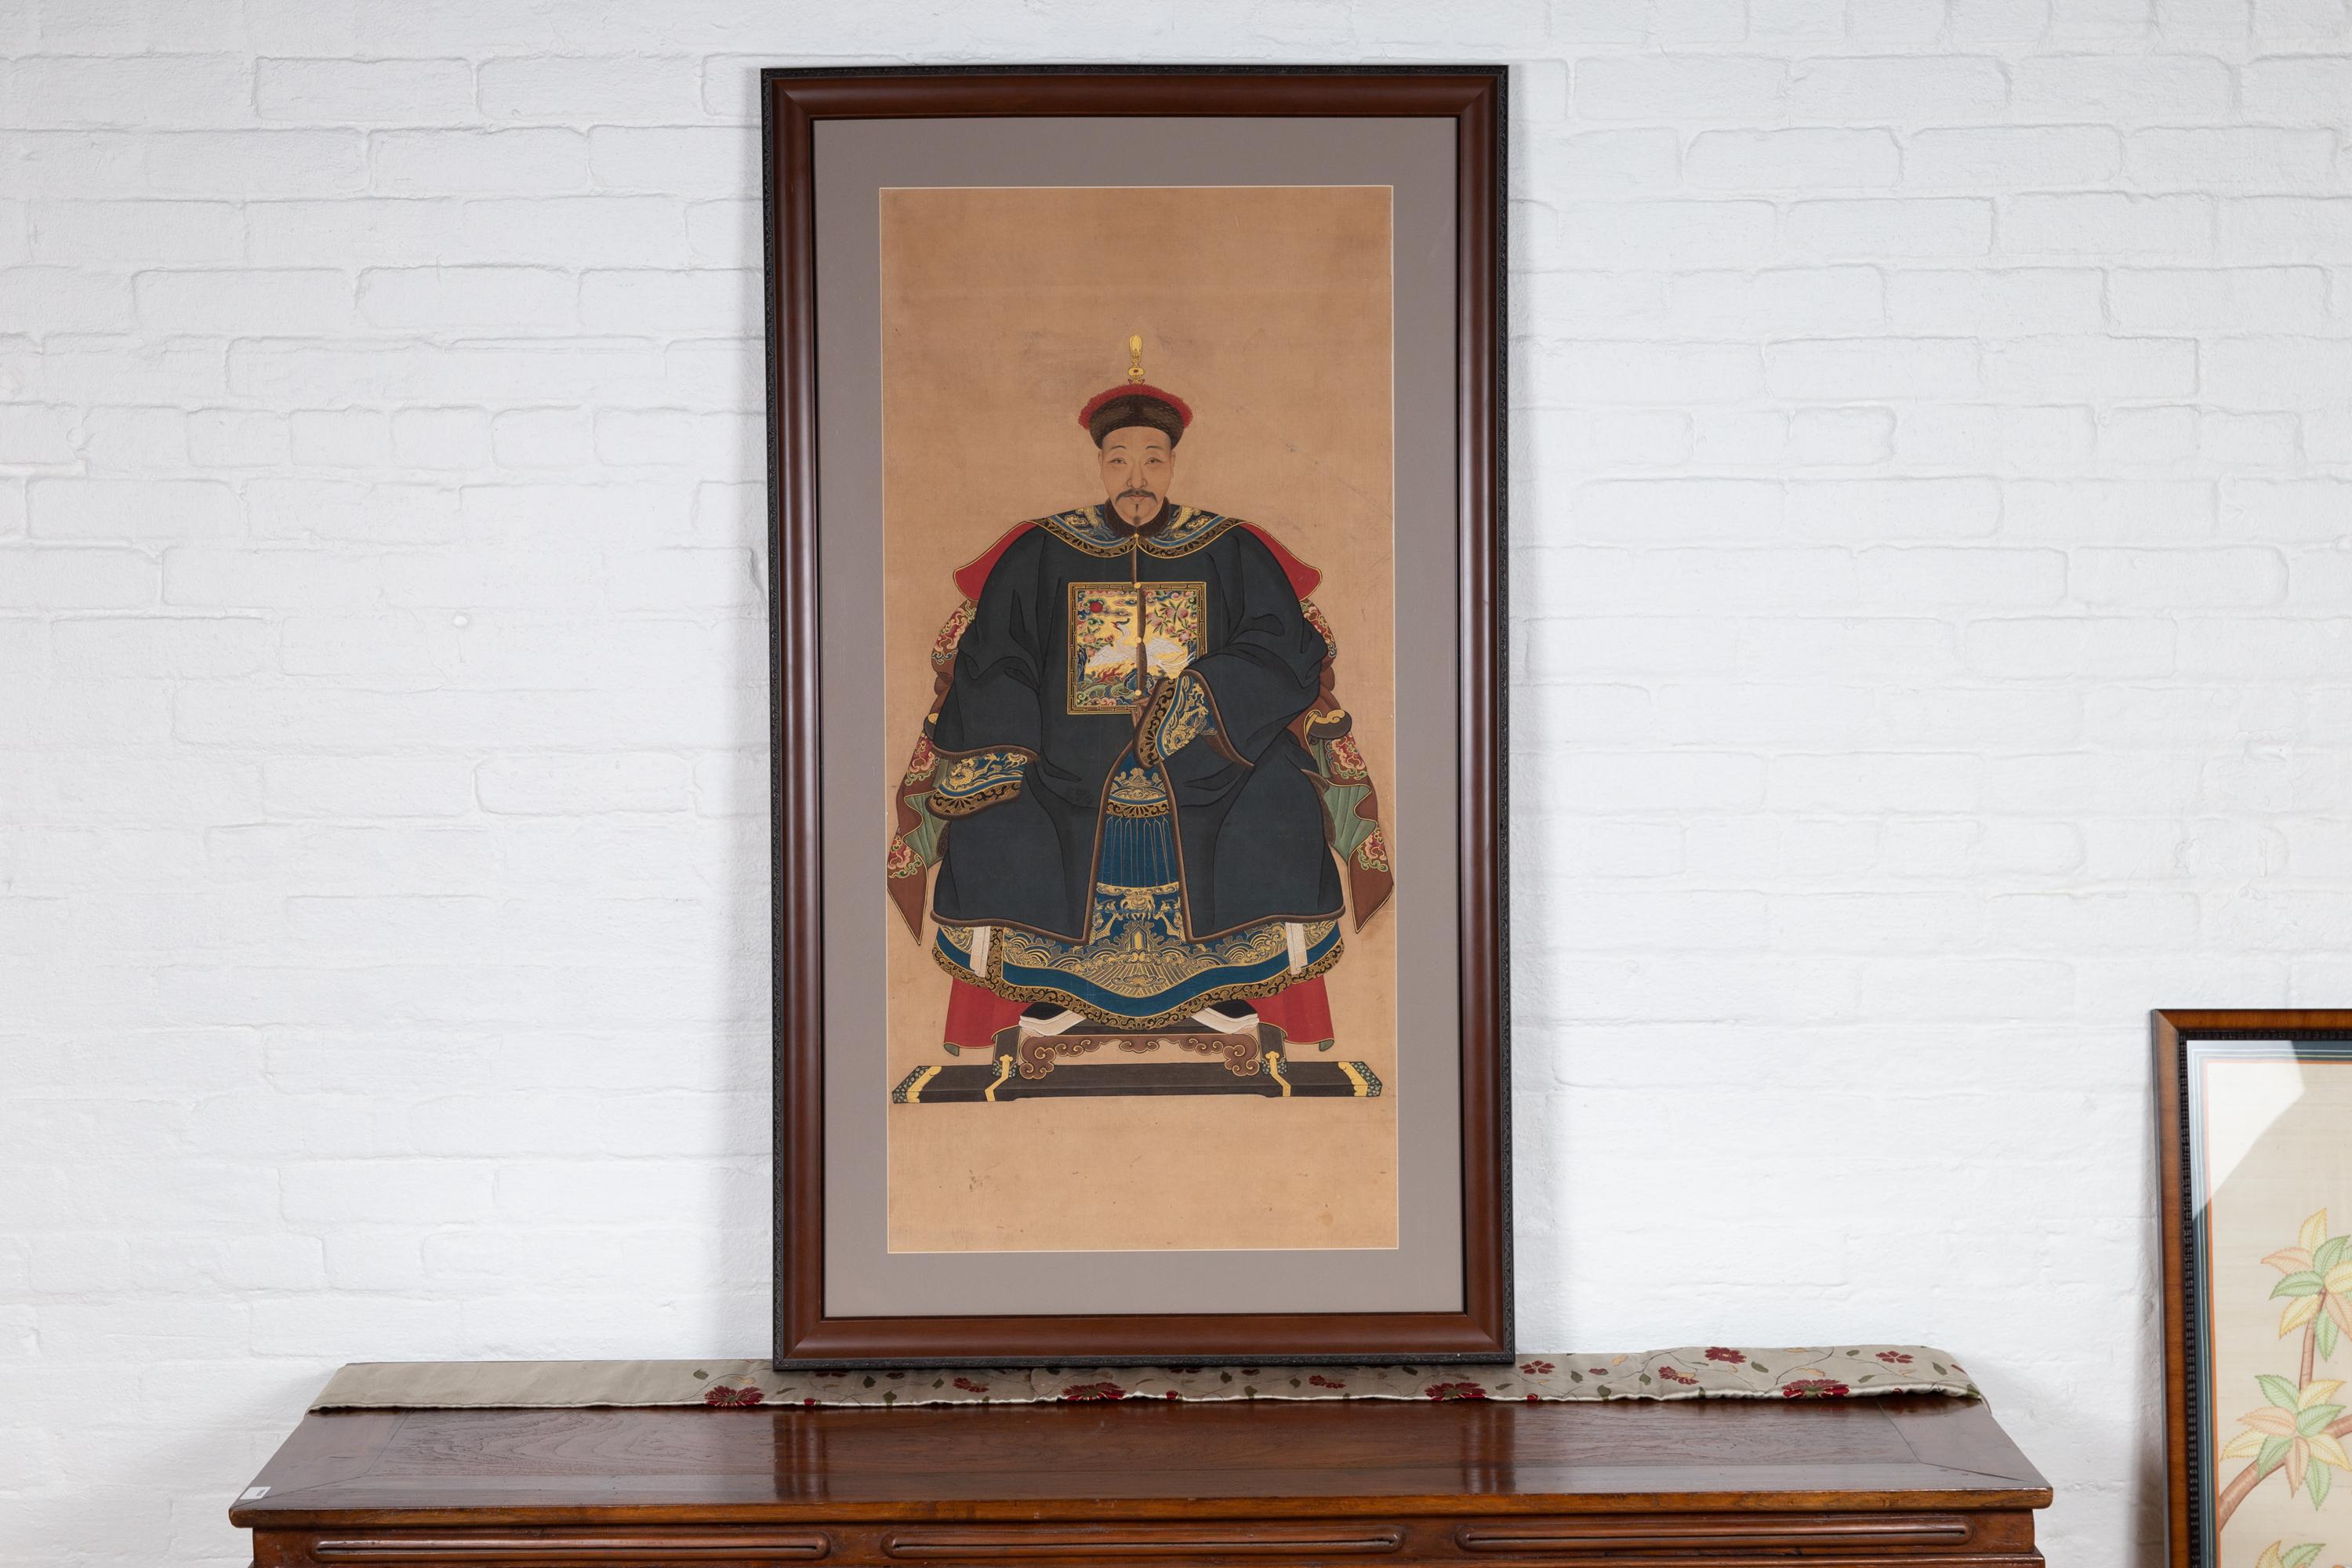 An antique Chinese Qing dynasty period framed ancestral portrait from the early 20th century depicting a patriarch. Born in China during the early years of the 20th century, this exquisite portrait features a high ranking official depicted seated in